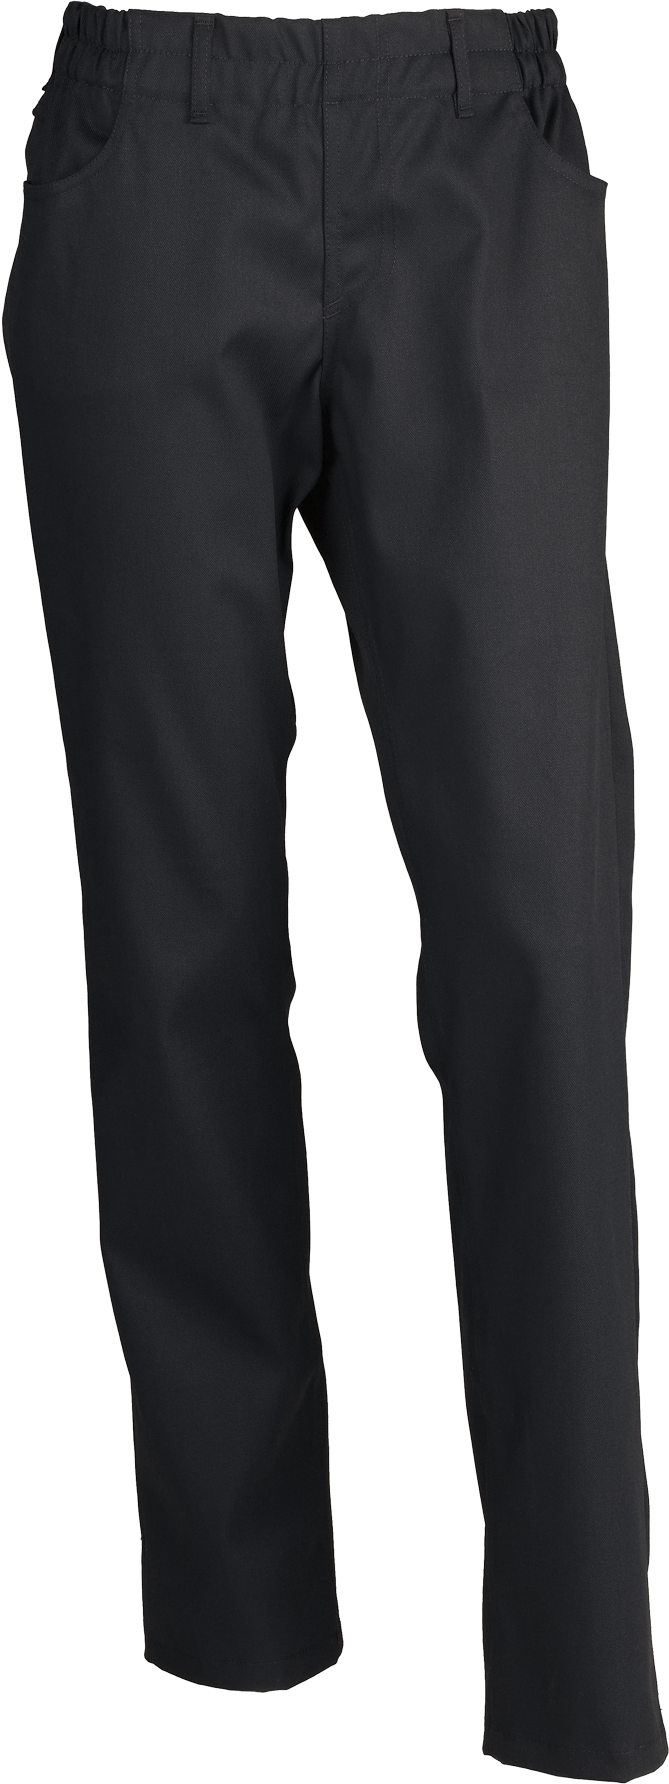 Unisex Pull-on trousers, Club-Classic (1050541)